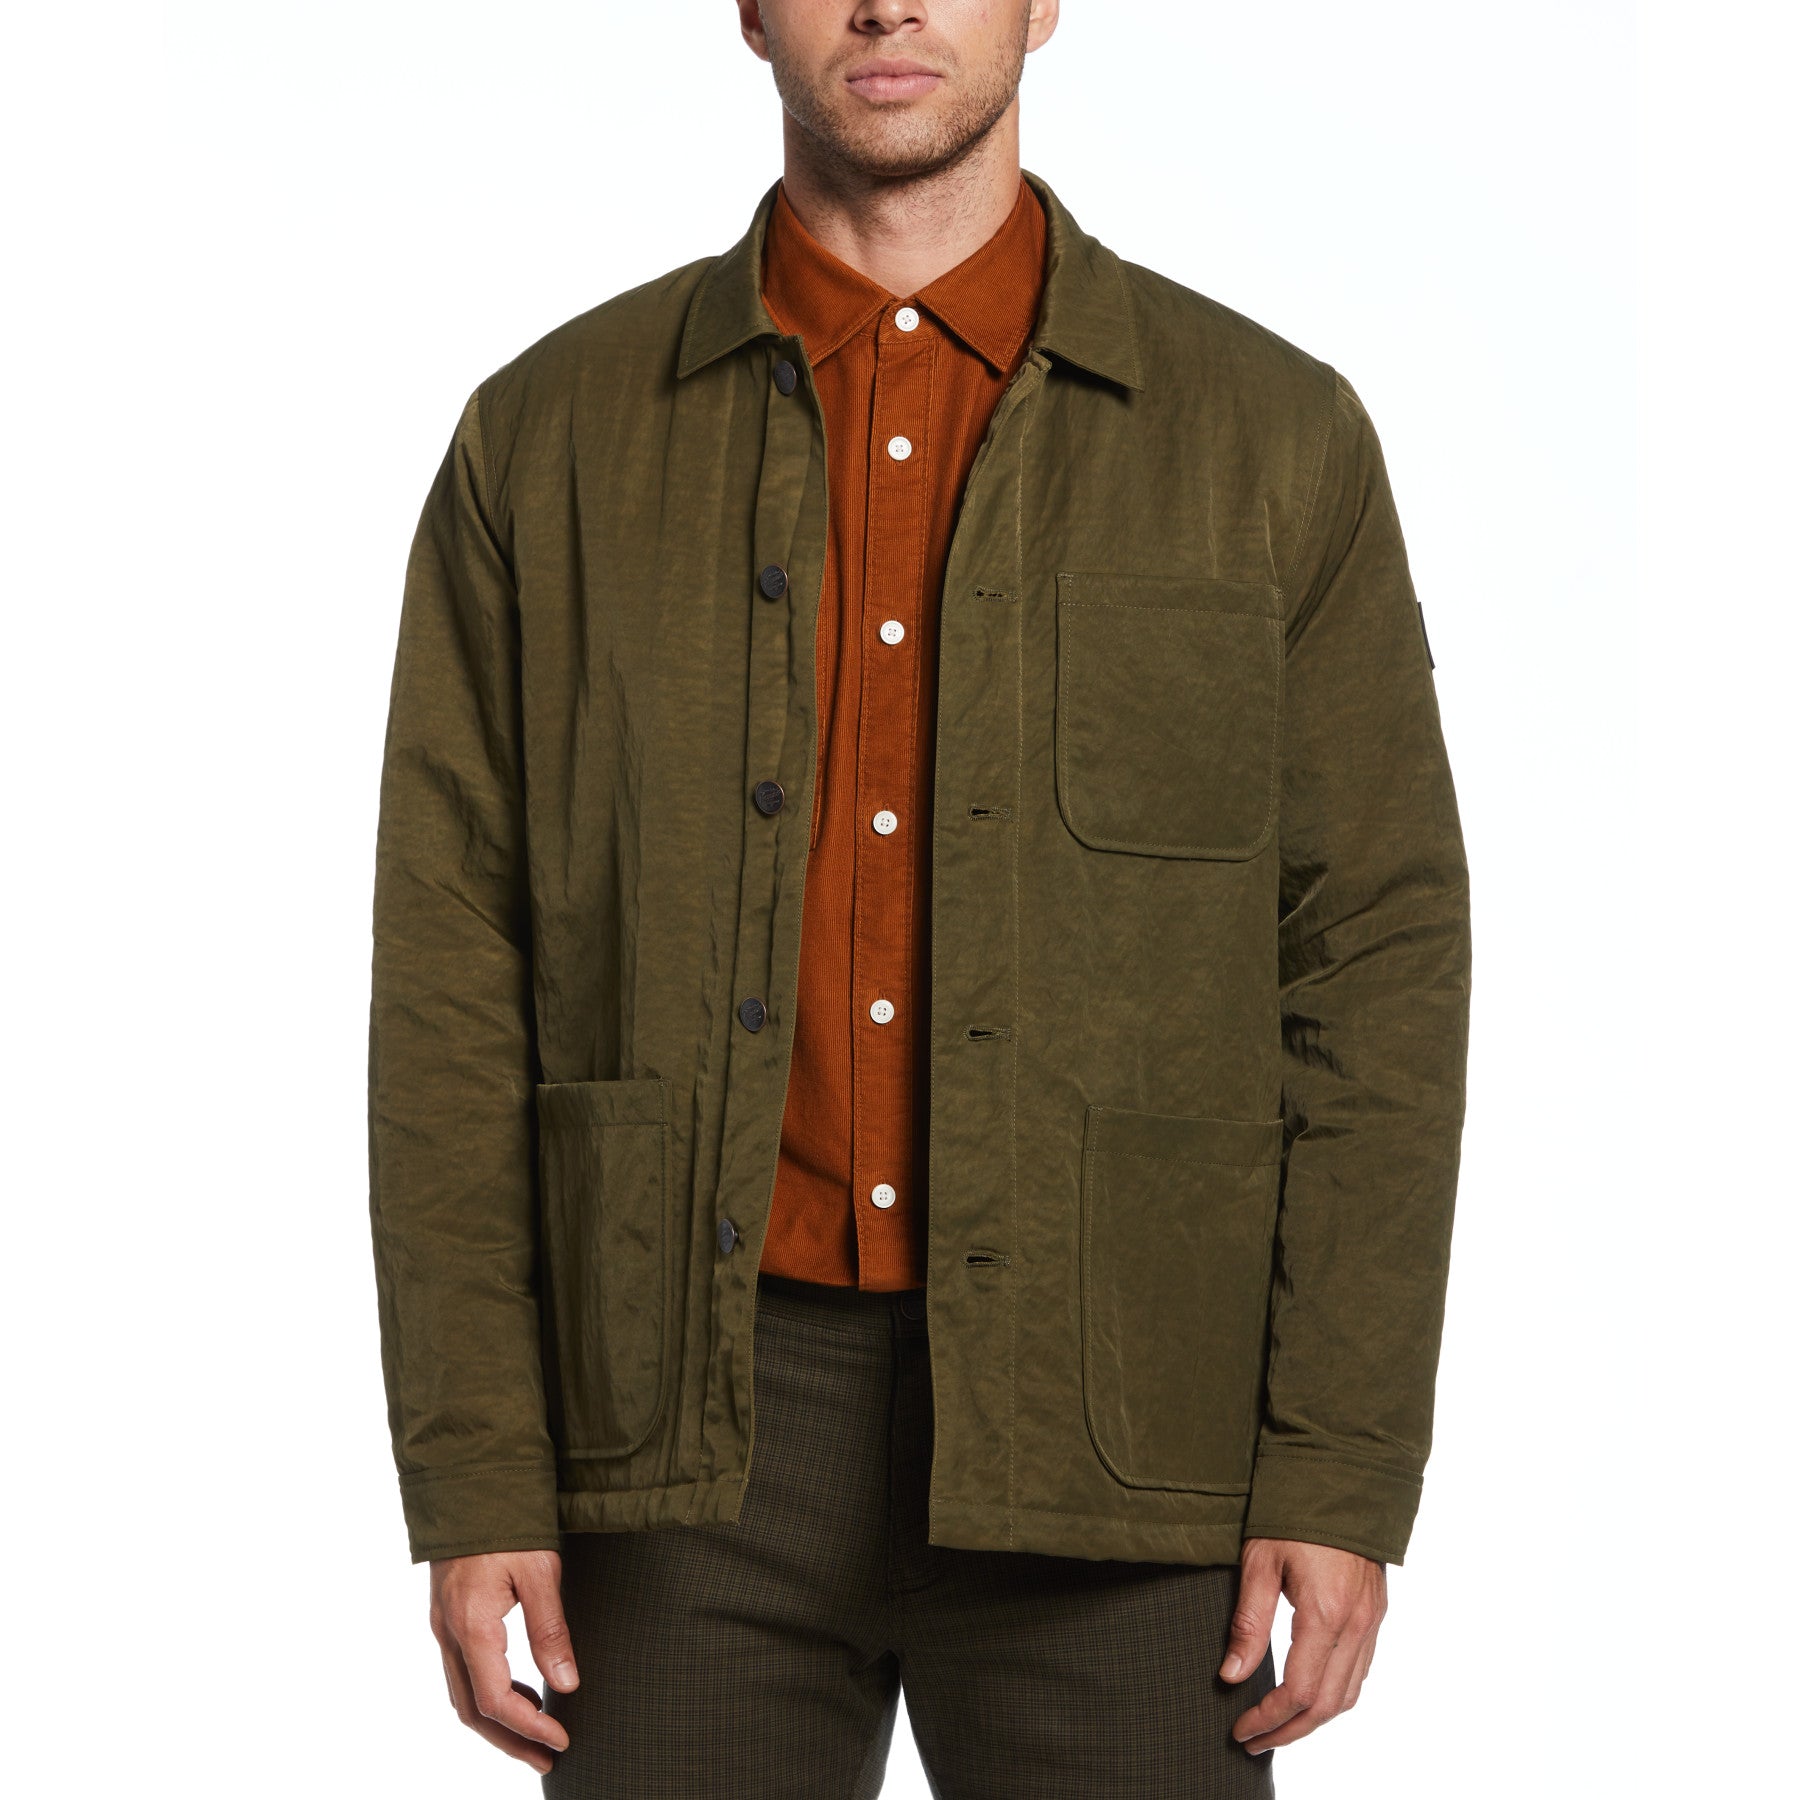 View Sherpa Lined Wax Jacket In Dark Olive information